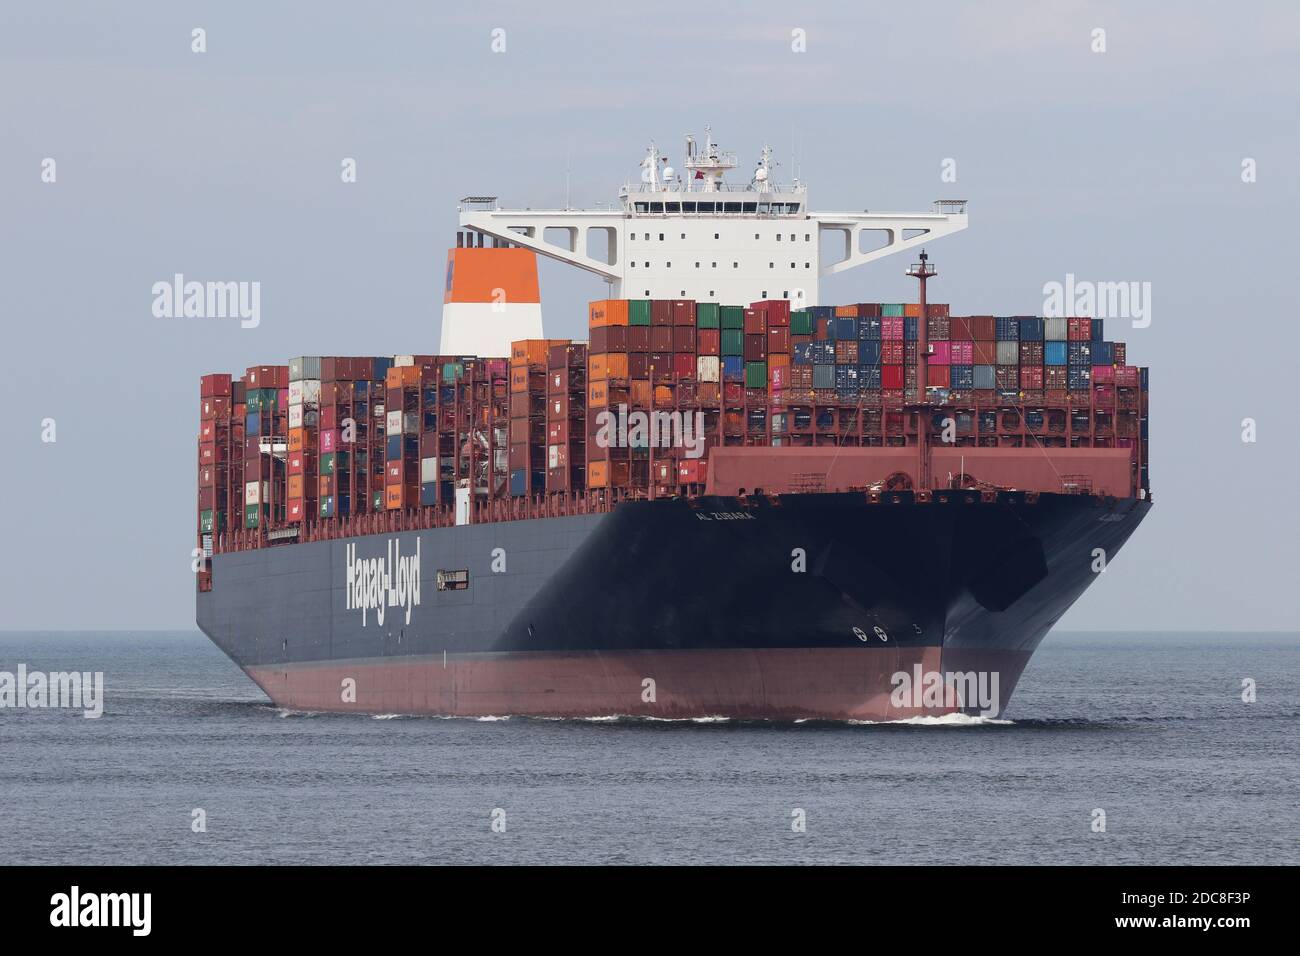 The container ship Al Zubara will pass Cuxhaven on August 20, 2020 on its way to Hamburg. Stock Photo